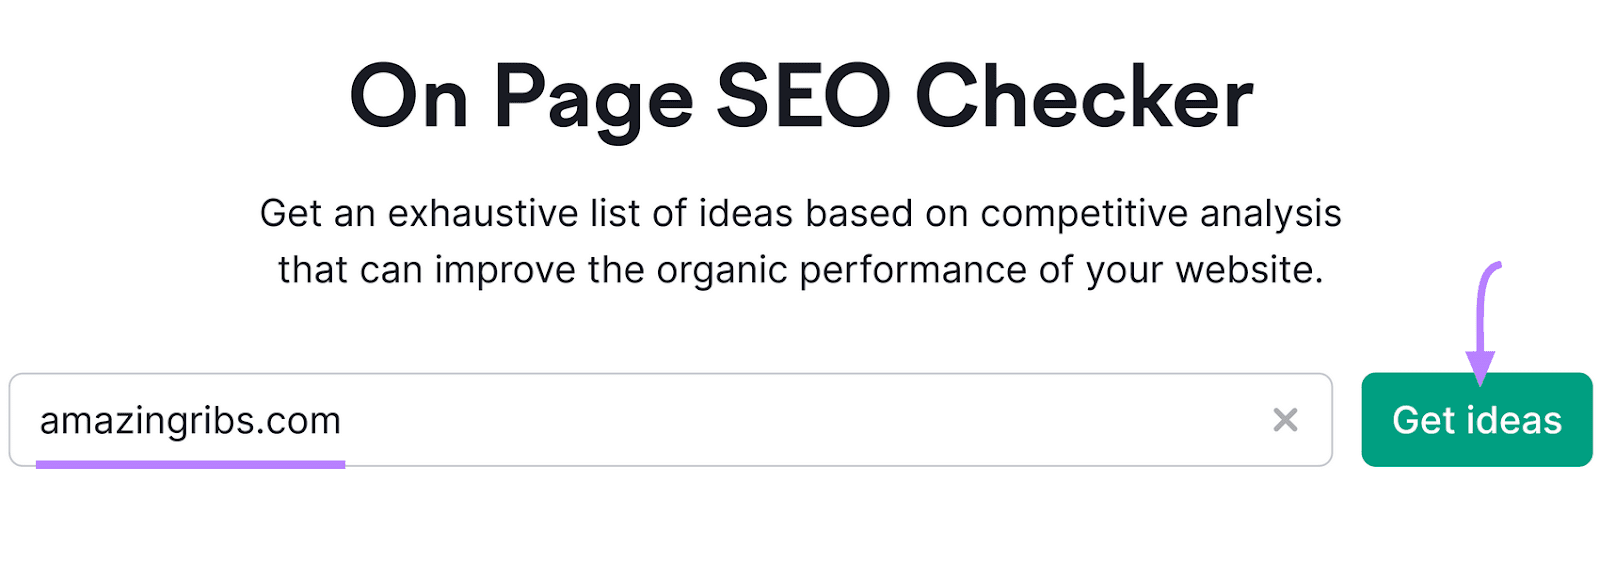 On Page SEO Checker tool with a search field for "amazingribs.com" and a highlighted "Get ideas" button.